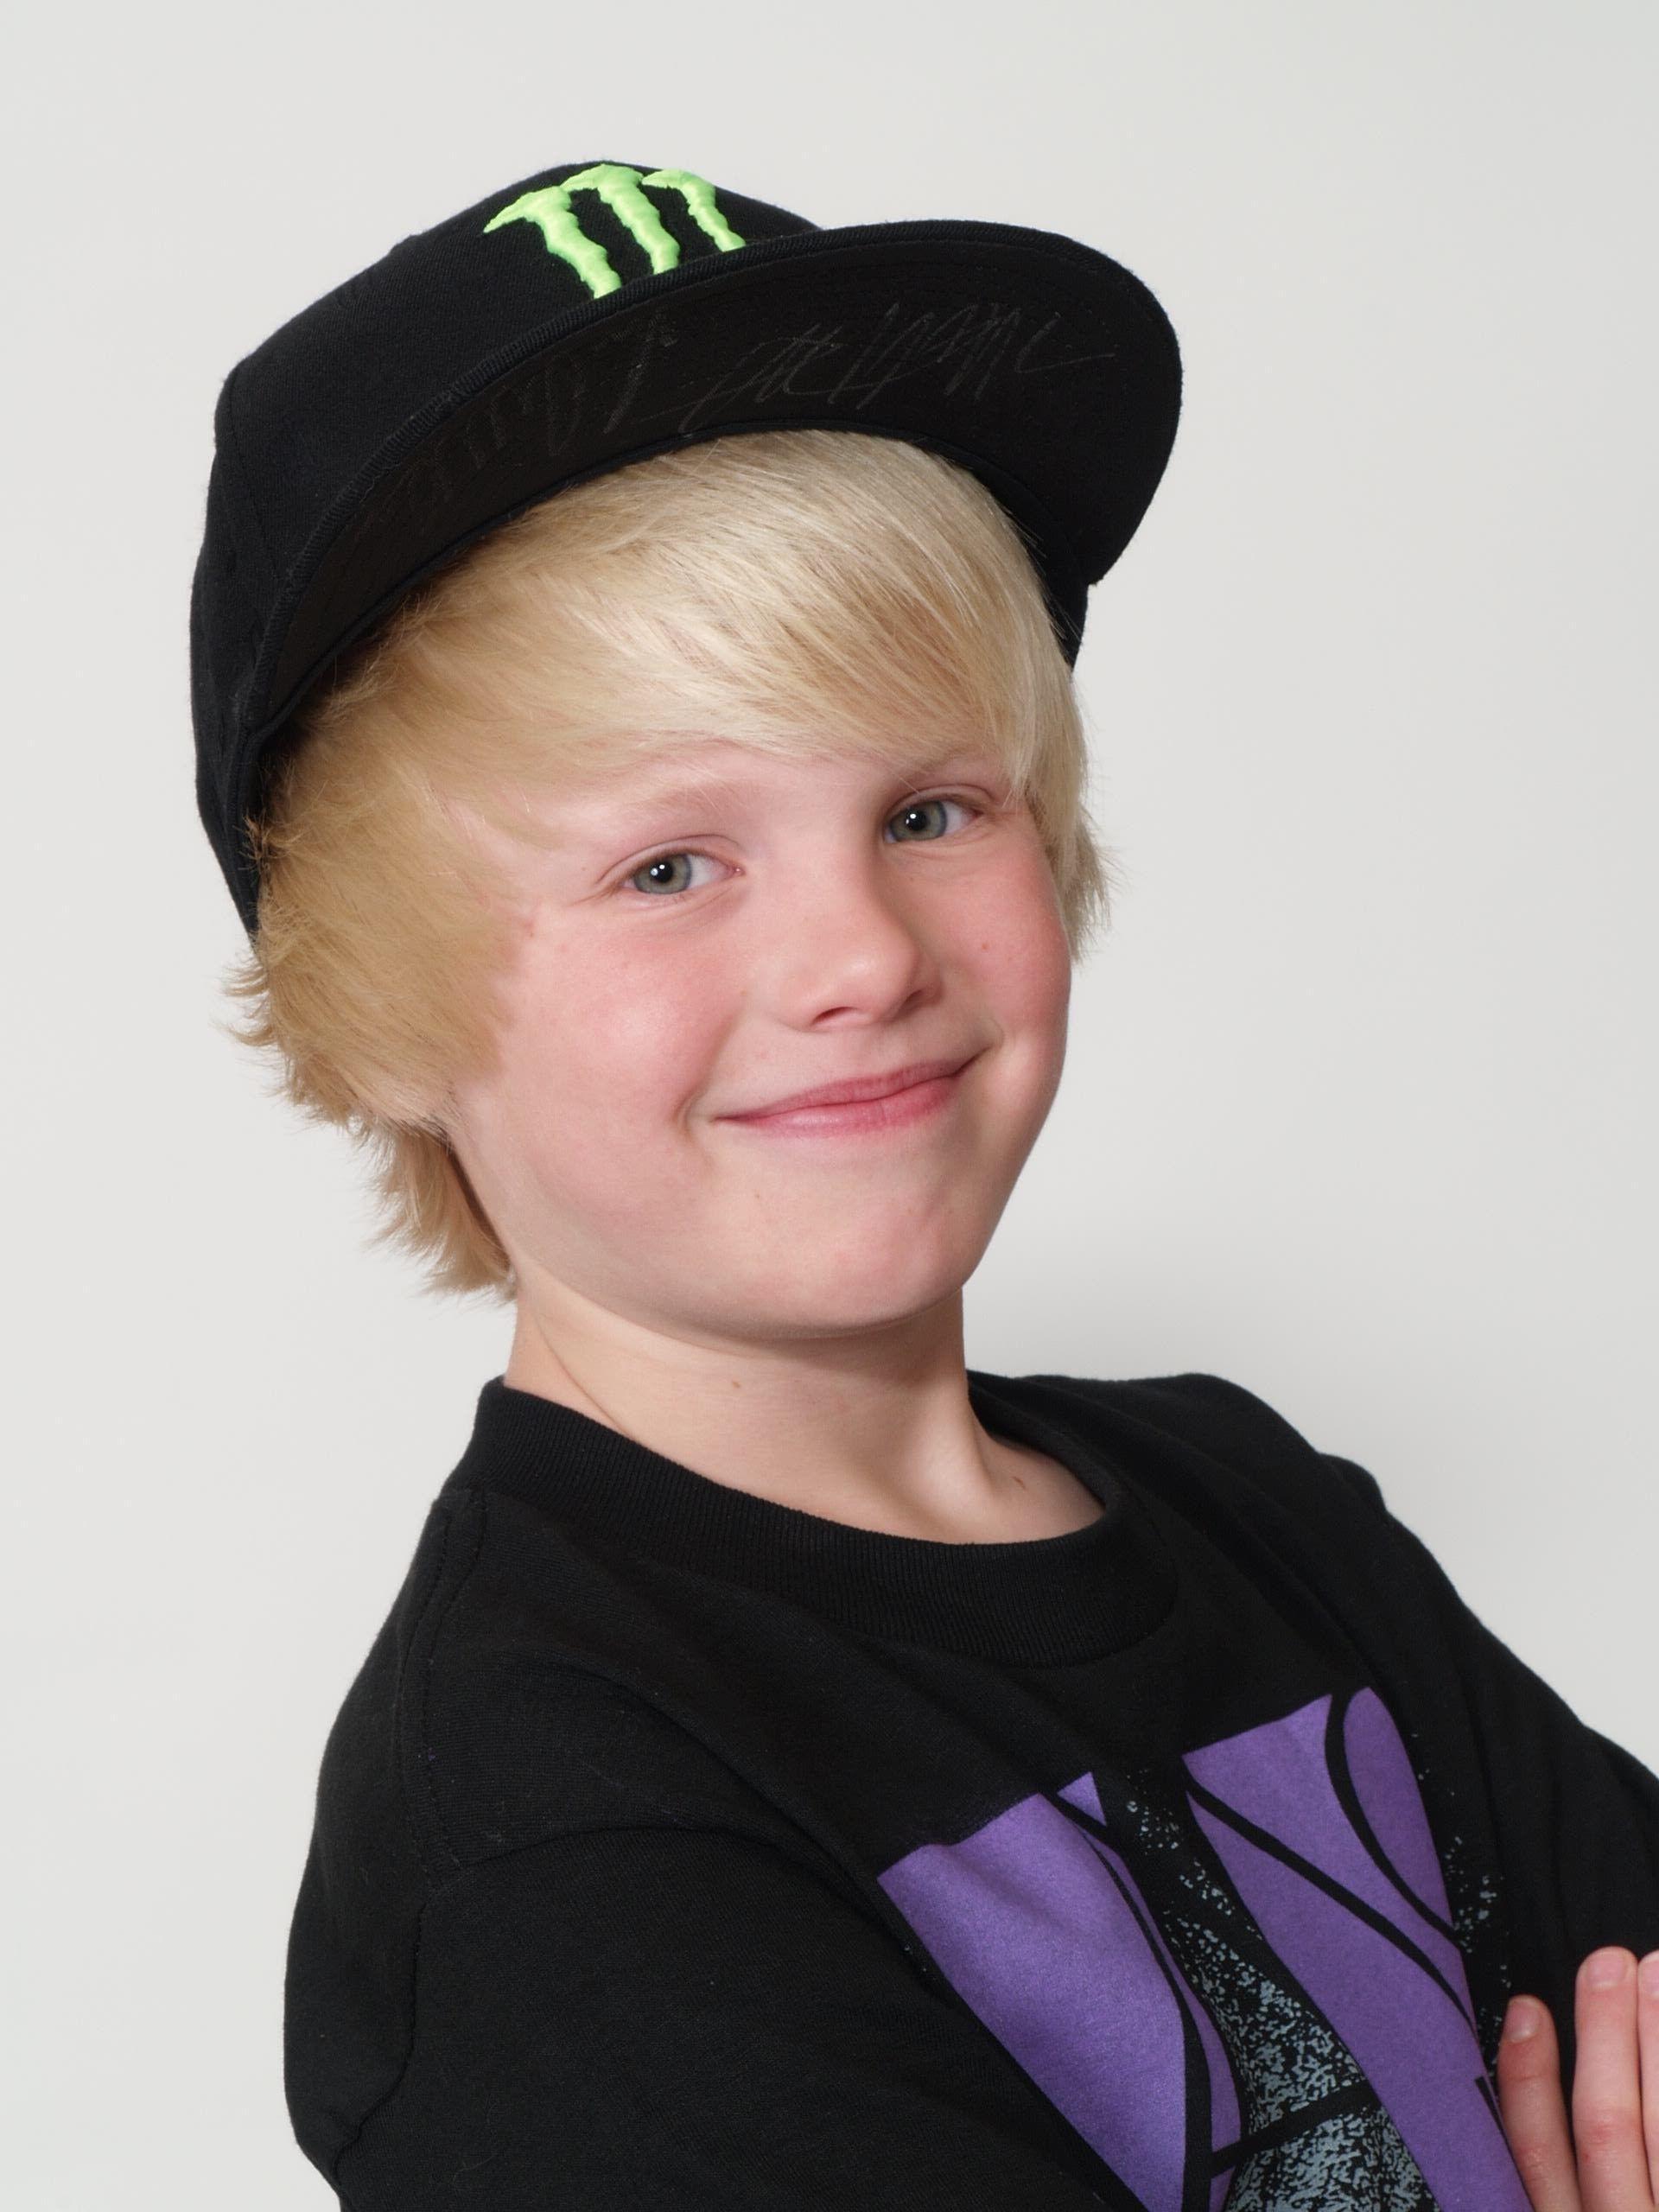 Carson Lueders. Known people people news and biographies